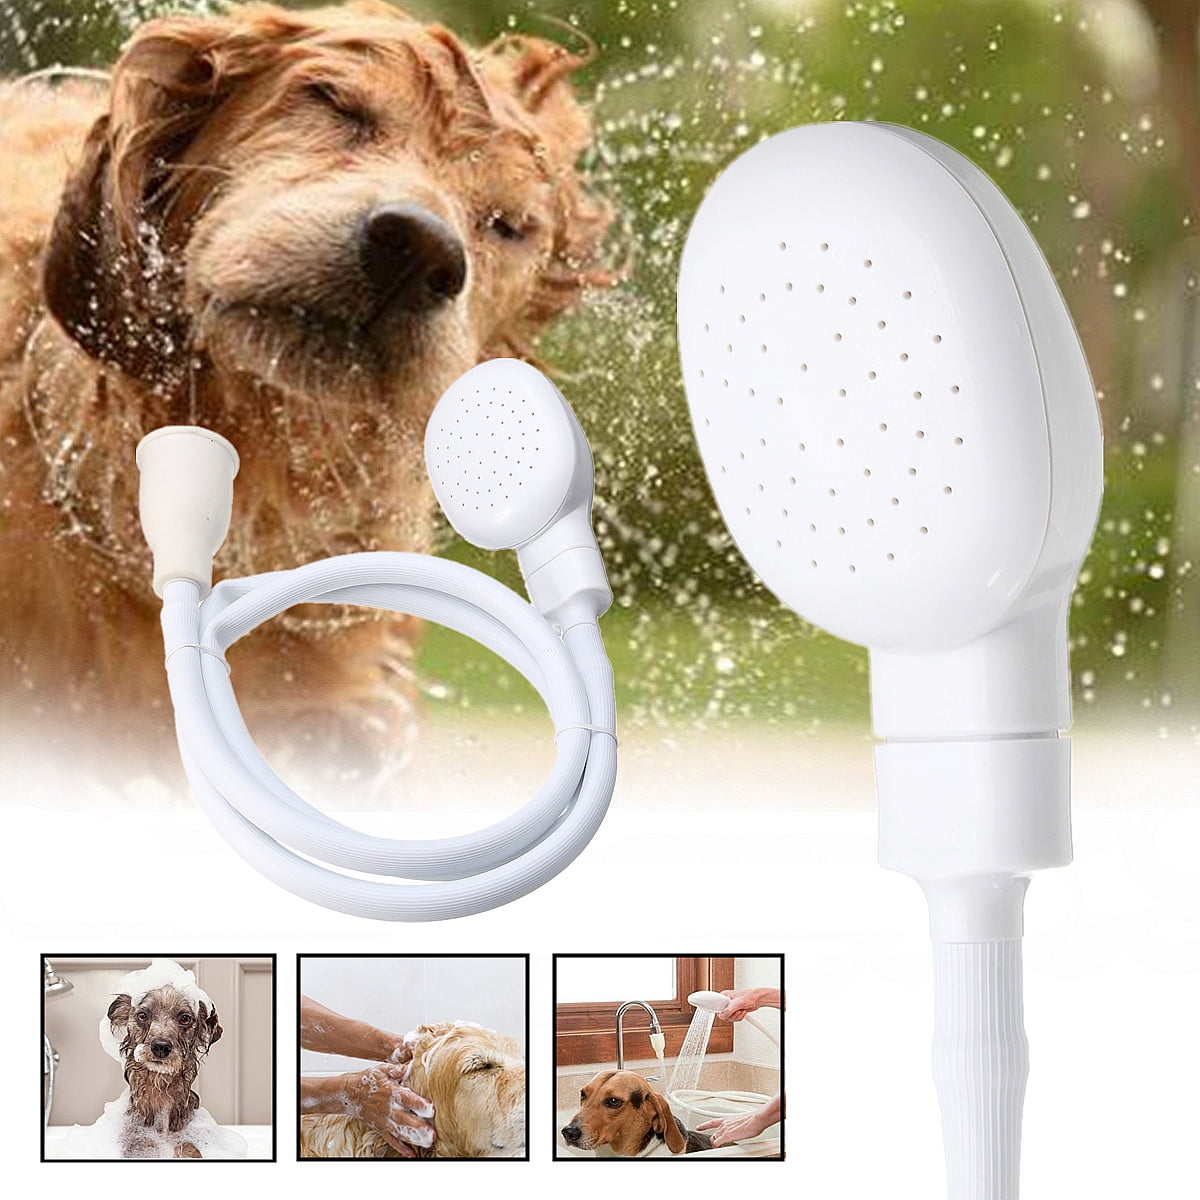 Star Factory Pet Dog Shower Sprayer,Quick Connect to Shower Head